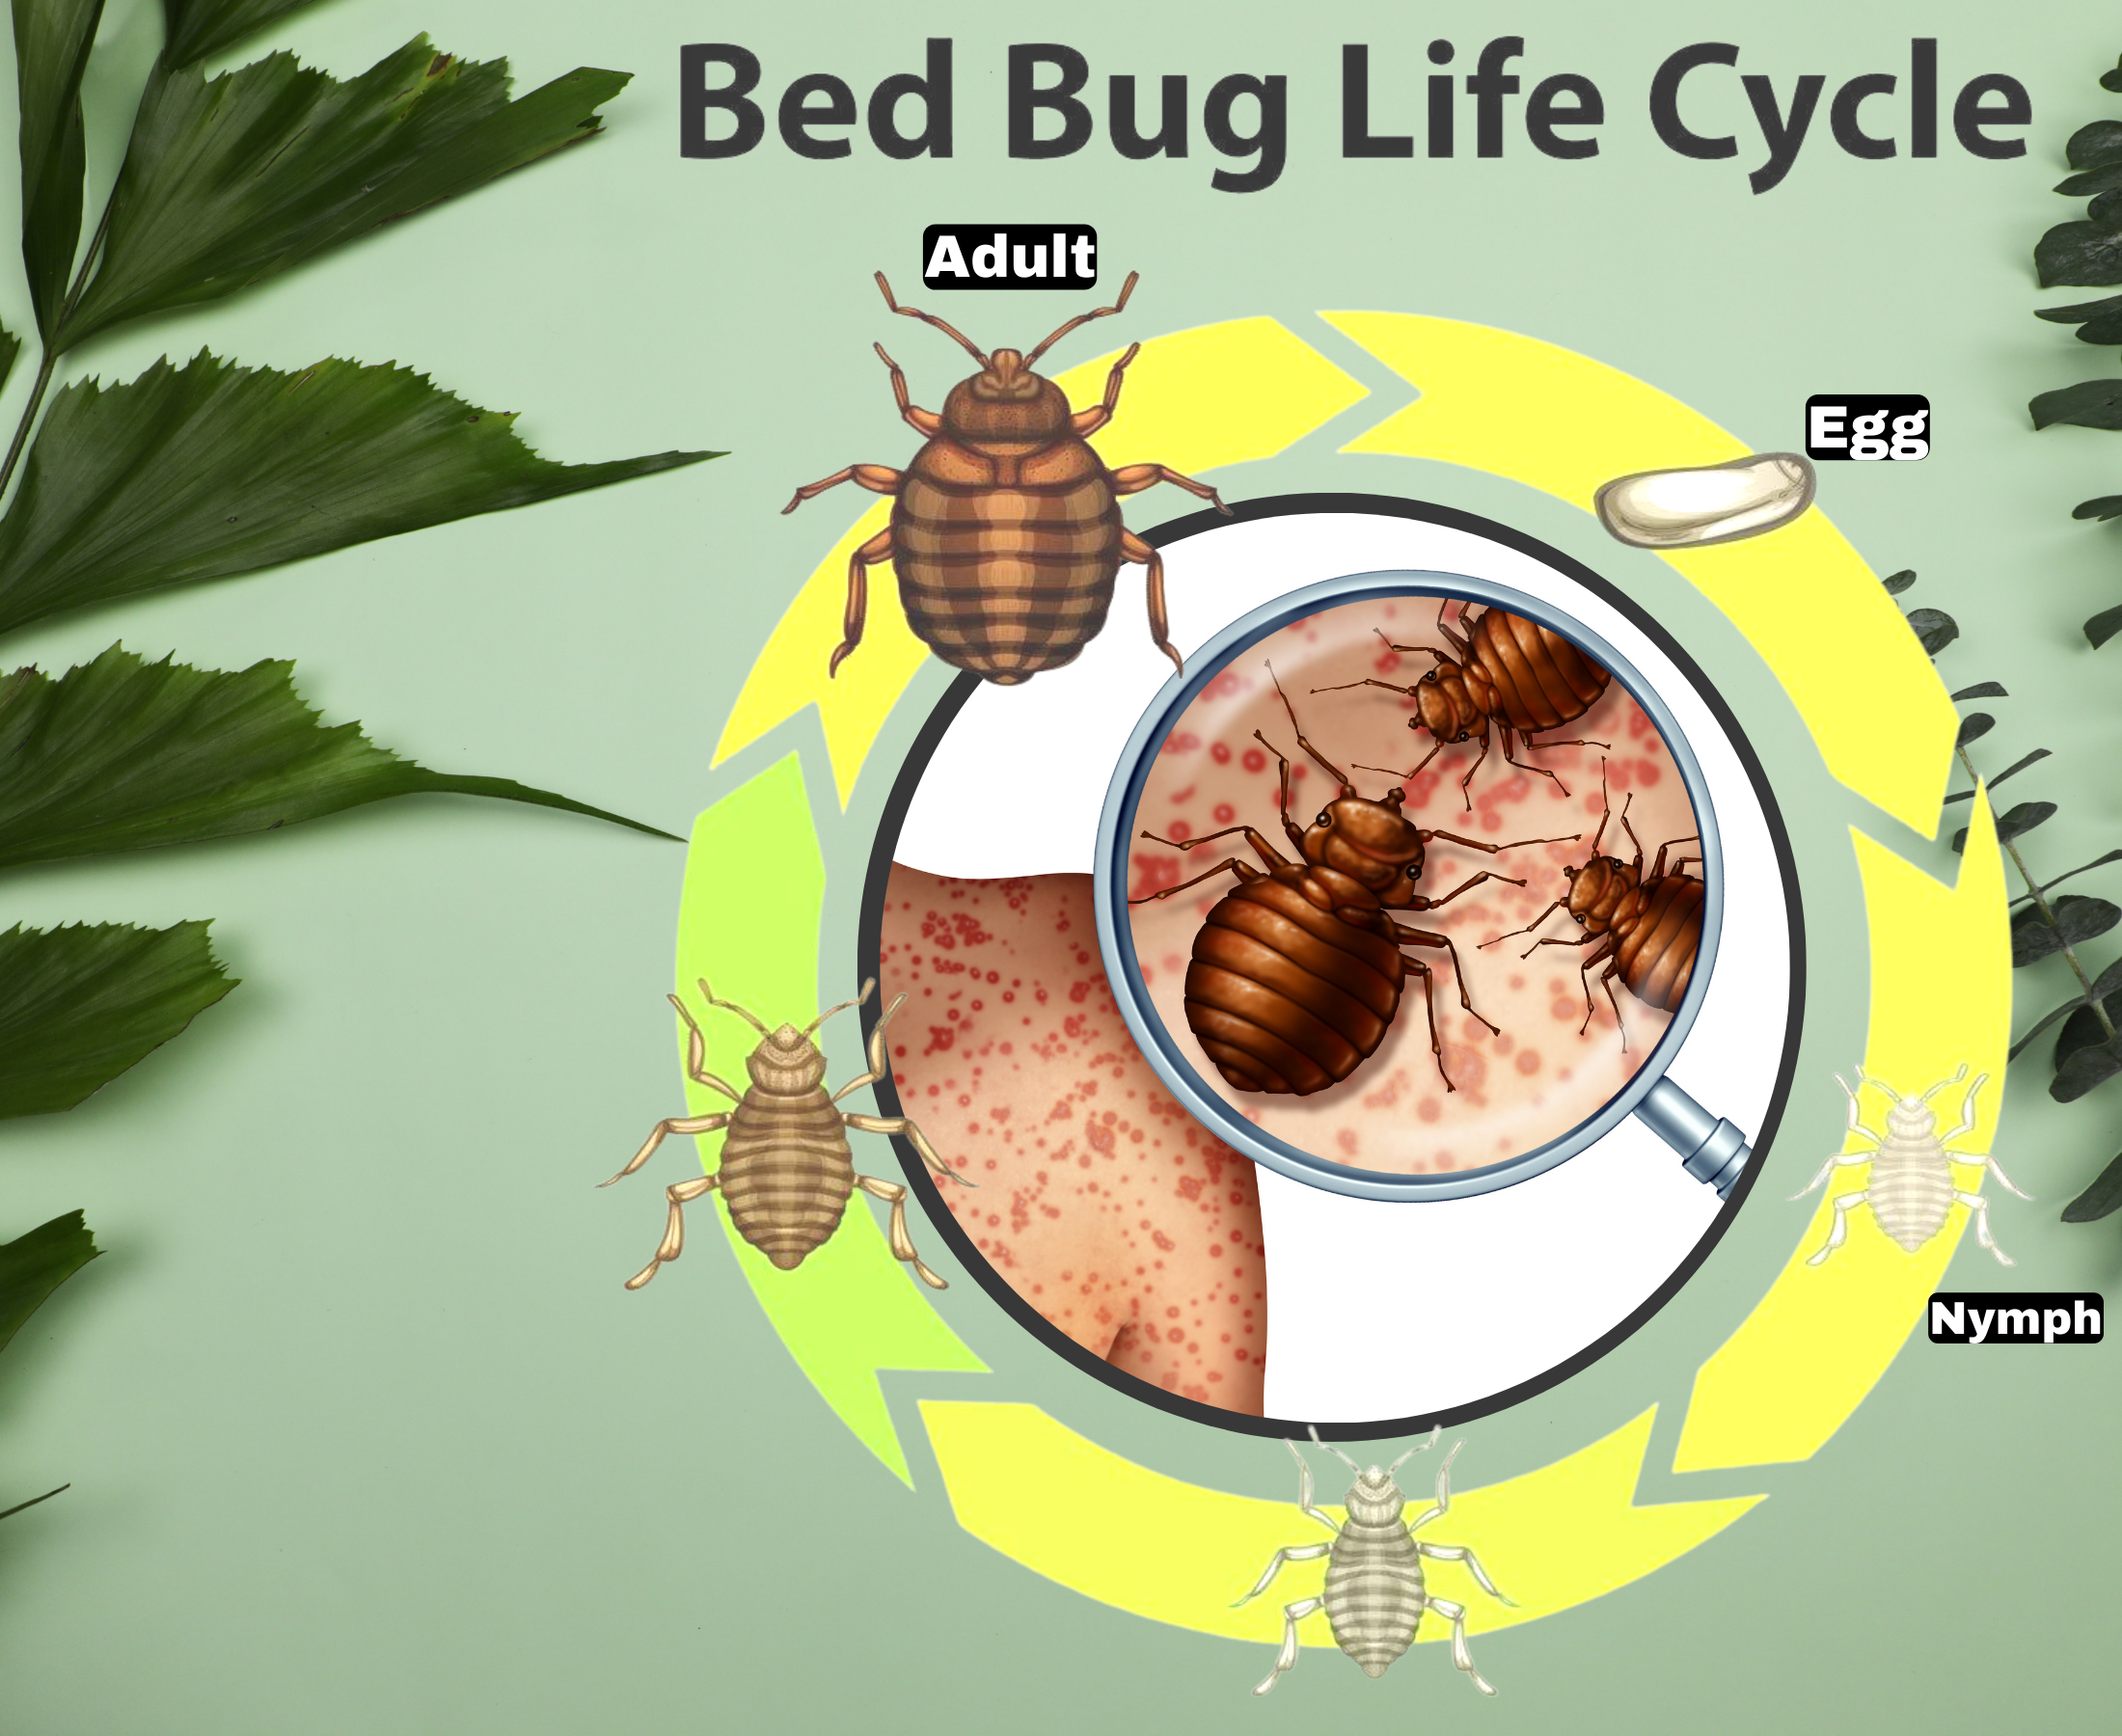 What are bed bugs and their life stages?